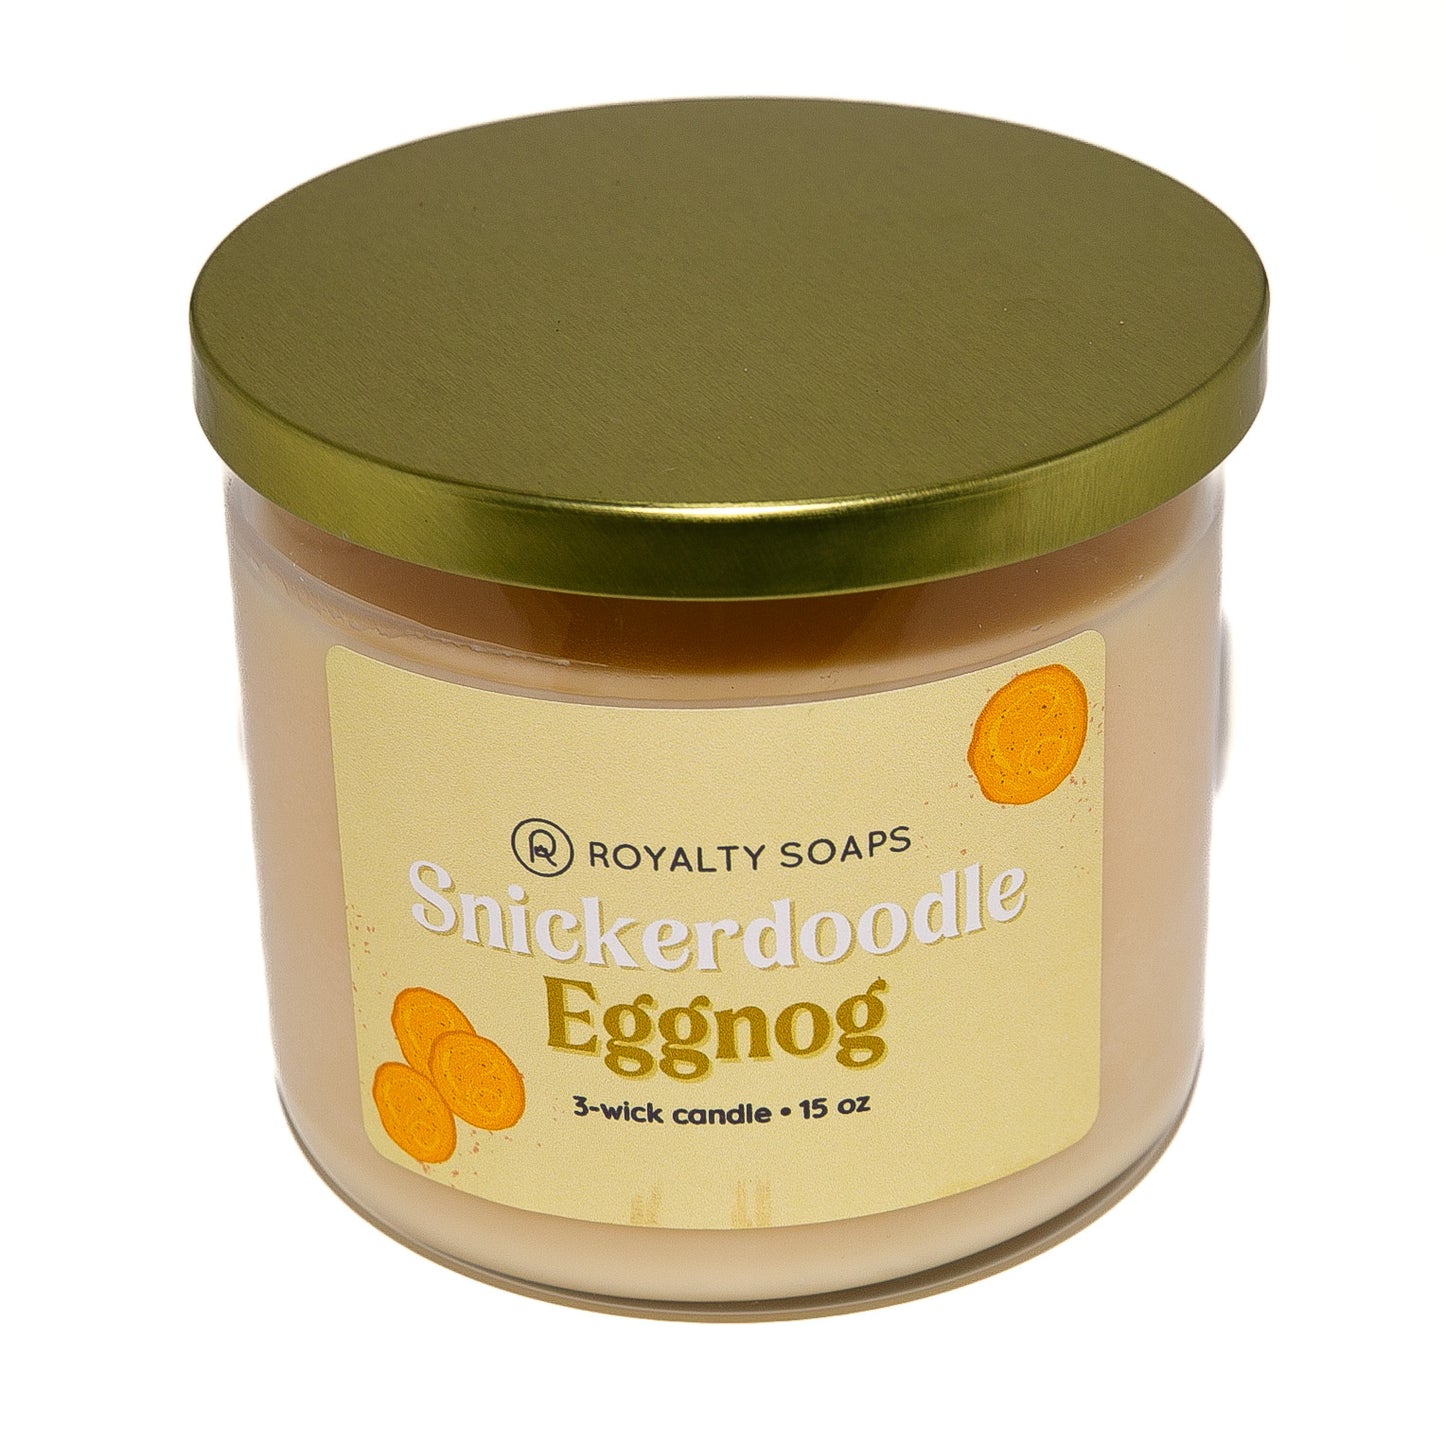 Snickerdoodle Eggnog 3-Wick Soy Candle